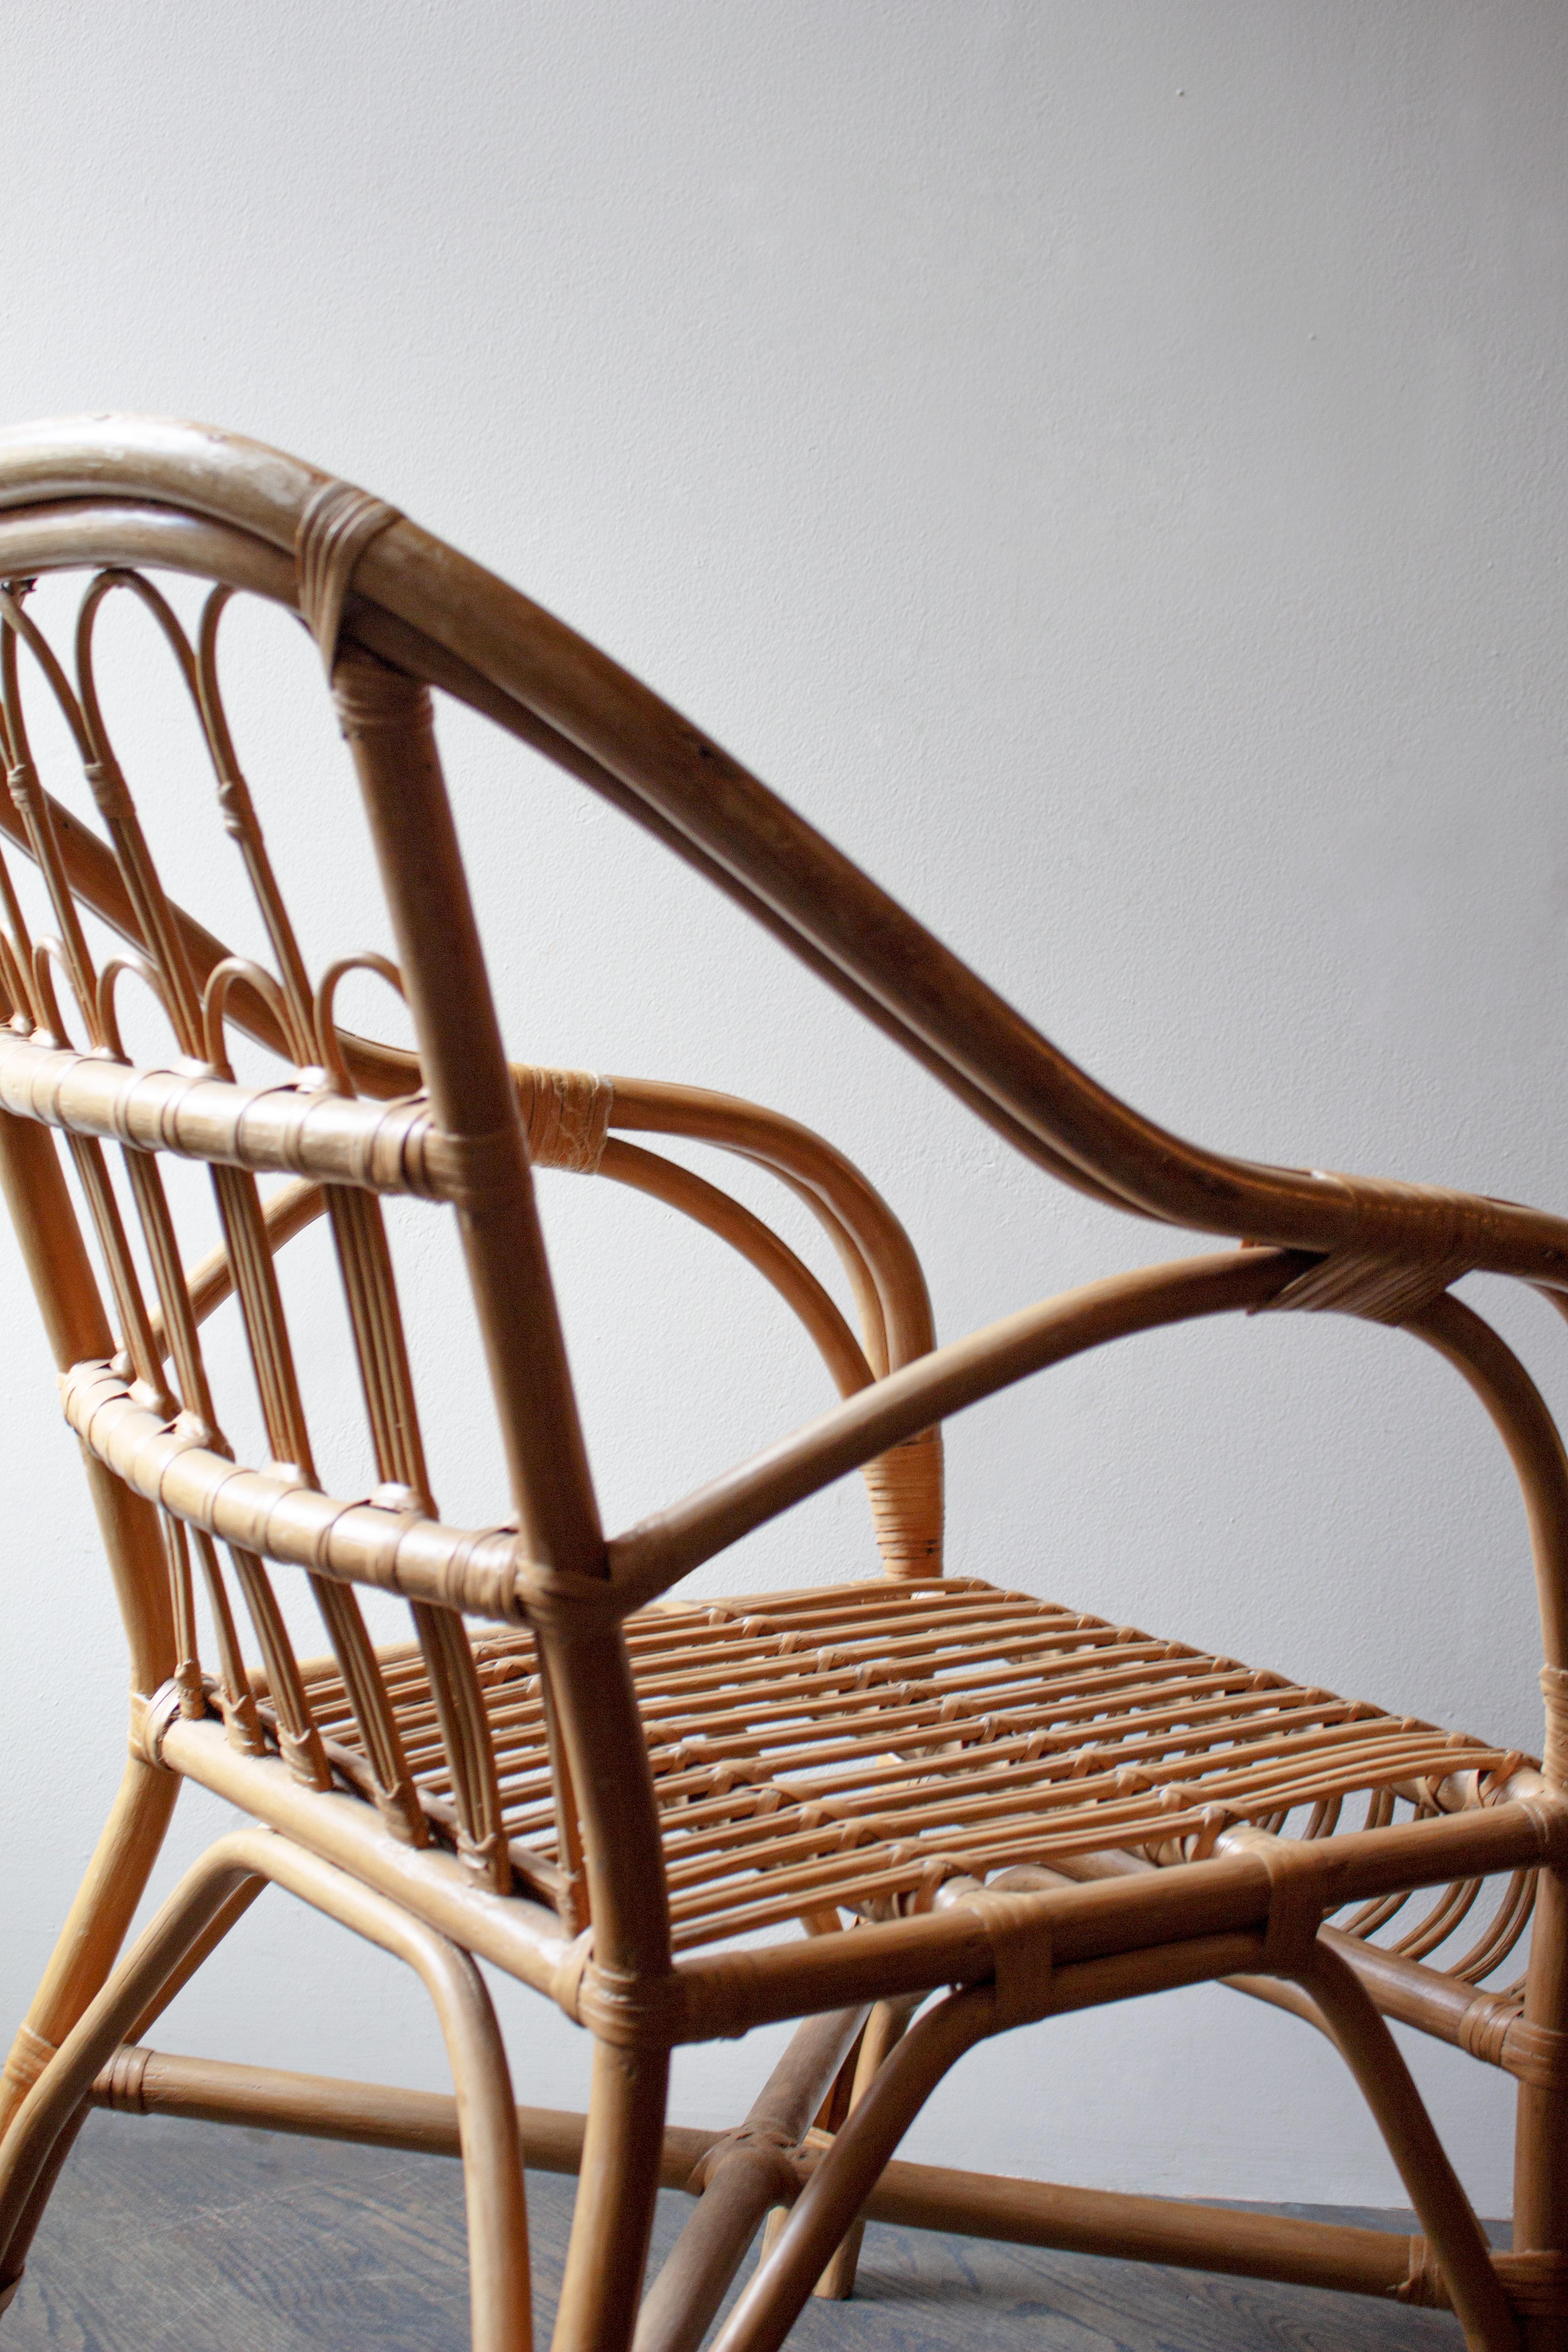 This rattan chair is whimsical yet polished. Rattan is sturdy and in great condition.